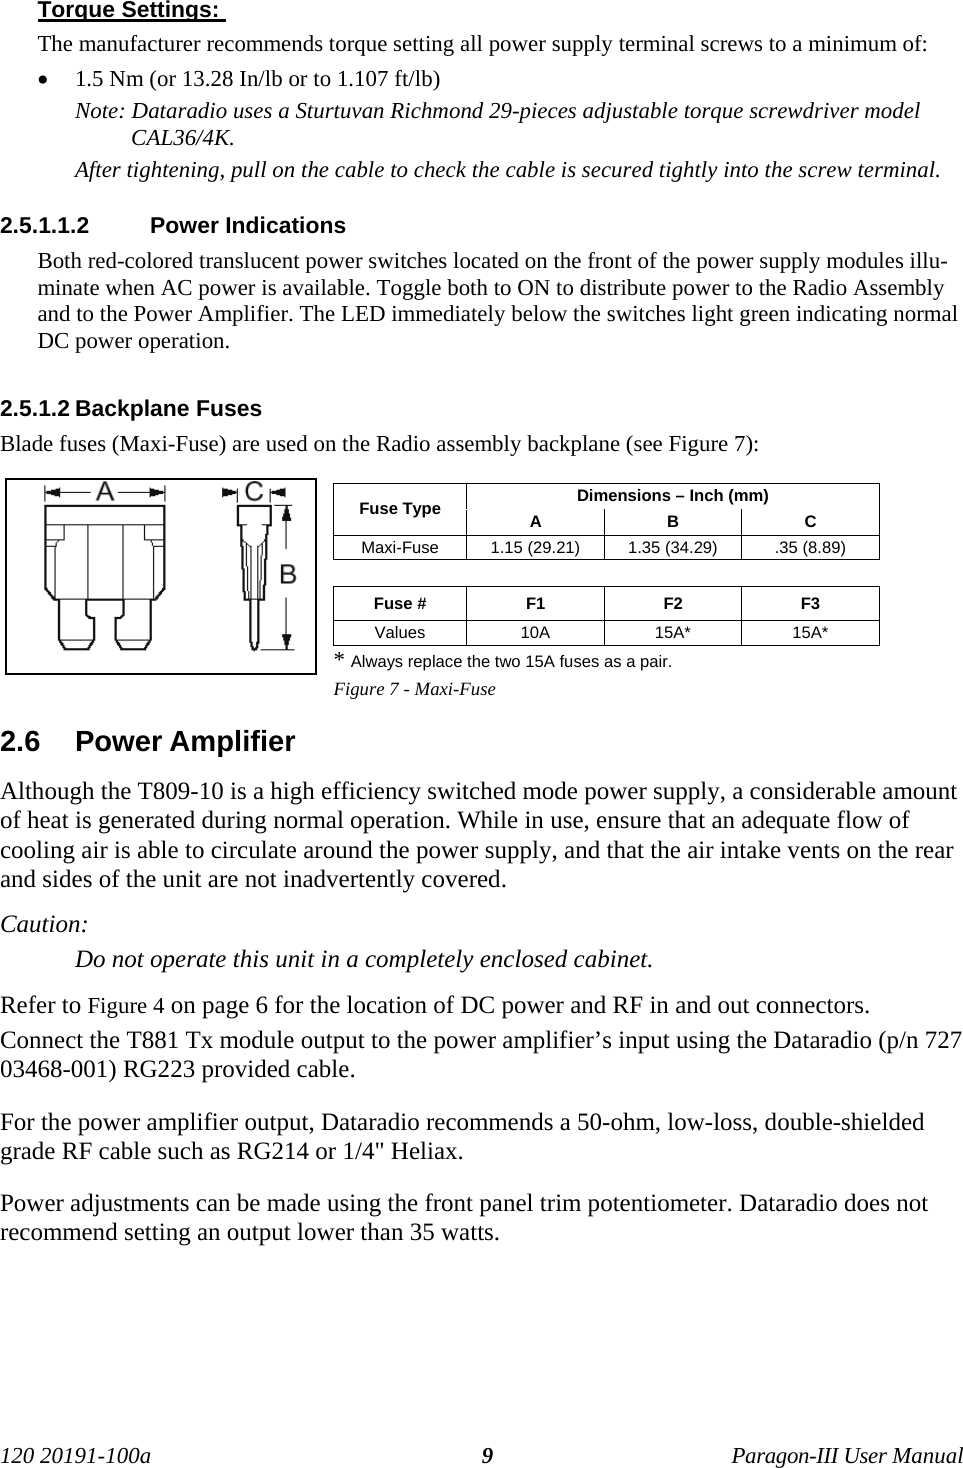 120 20191-100a Paragon-III User Manual9Torque Settings: The manufacturer recommends torque setting all power supply terminal screws to a minimum of:• 1.5 Nm (or 13.28 In/lb or to 1.107 ft/lb)Note: Dataradio uses a Sturtuvan Richmond 29-pieces adjustable torque screwdriver modelCAL36/4K.After tightening, pull on the cable to check the cable is secured tightly into the screw terminal.2.5.1.1.2  Power IndicationsBoth red-colored translucent power switches located on the front of the power supply modules illu-minate when AC power is available. Toggle both to ON to distribute power to the Radio Assemblyand to the Power Amplifier. The LED immediately below the switches light green indicating normalDC power operation. 2.5.1.2 Backplane FusesBlade fuses (Maxi-Fuse) are used on the Radio assembly backplane (see Figure 7):Dimensions – Inch (mm)Fuse Type A B CMaxi-Fuse 1.15 (29.21) 1.35 (34.29) .35 (8.89)Fuse # F1 F2 F3Values 10A 15A* 15A** Always replace the two 15A fuses as a pair.Figure 7 - Maxi-Fuse2.6  Power AmplifierAlthough the T809-10 is a high efficiency switched mode power supply, a considerable amountof heat is generated during normal operation. While in use, ensure that an adequate flow ofcooling air is able to circulate around the power supply, and that the air intake vents on the rearand sides of the unit are not inadvertently covered.Caution:Do not operate this unit in a completely enclosed cabinet.Refer to Figure 4 on page 6 for the location of DC power and RF in and out connectors.Connect the T881 Tx module output to the power amplifier’s input using the Dataradio (p/n 72703468-001) RG223 provided cable.For the power amplifier output, Dataradio recommends a 50-ohm, low-loss, double-shieldedgrade RF cable such as RG214 or 1/4&quot; Heliax. Power adjustments can be made using the front panel trim potentiometer. Dataradio does notrecommend setting an output lower than 35 watts. 